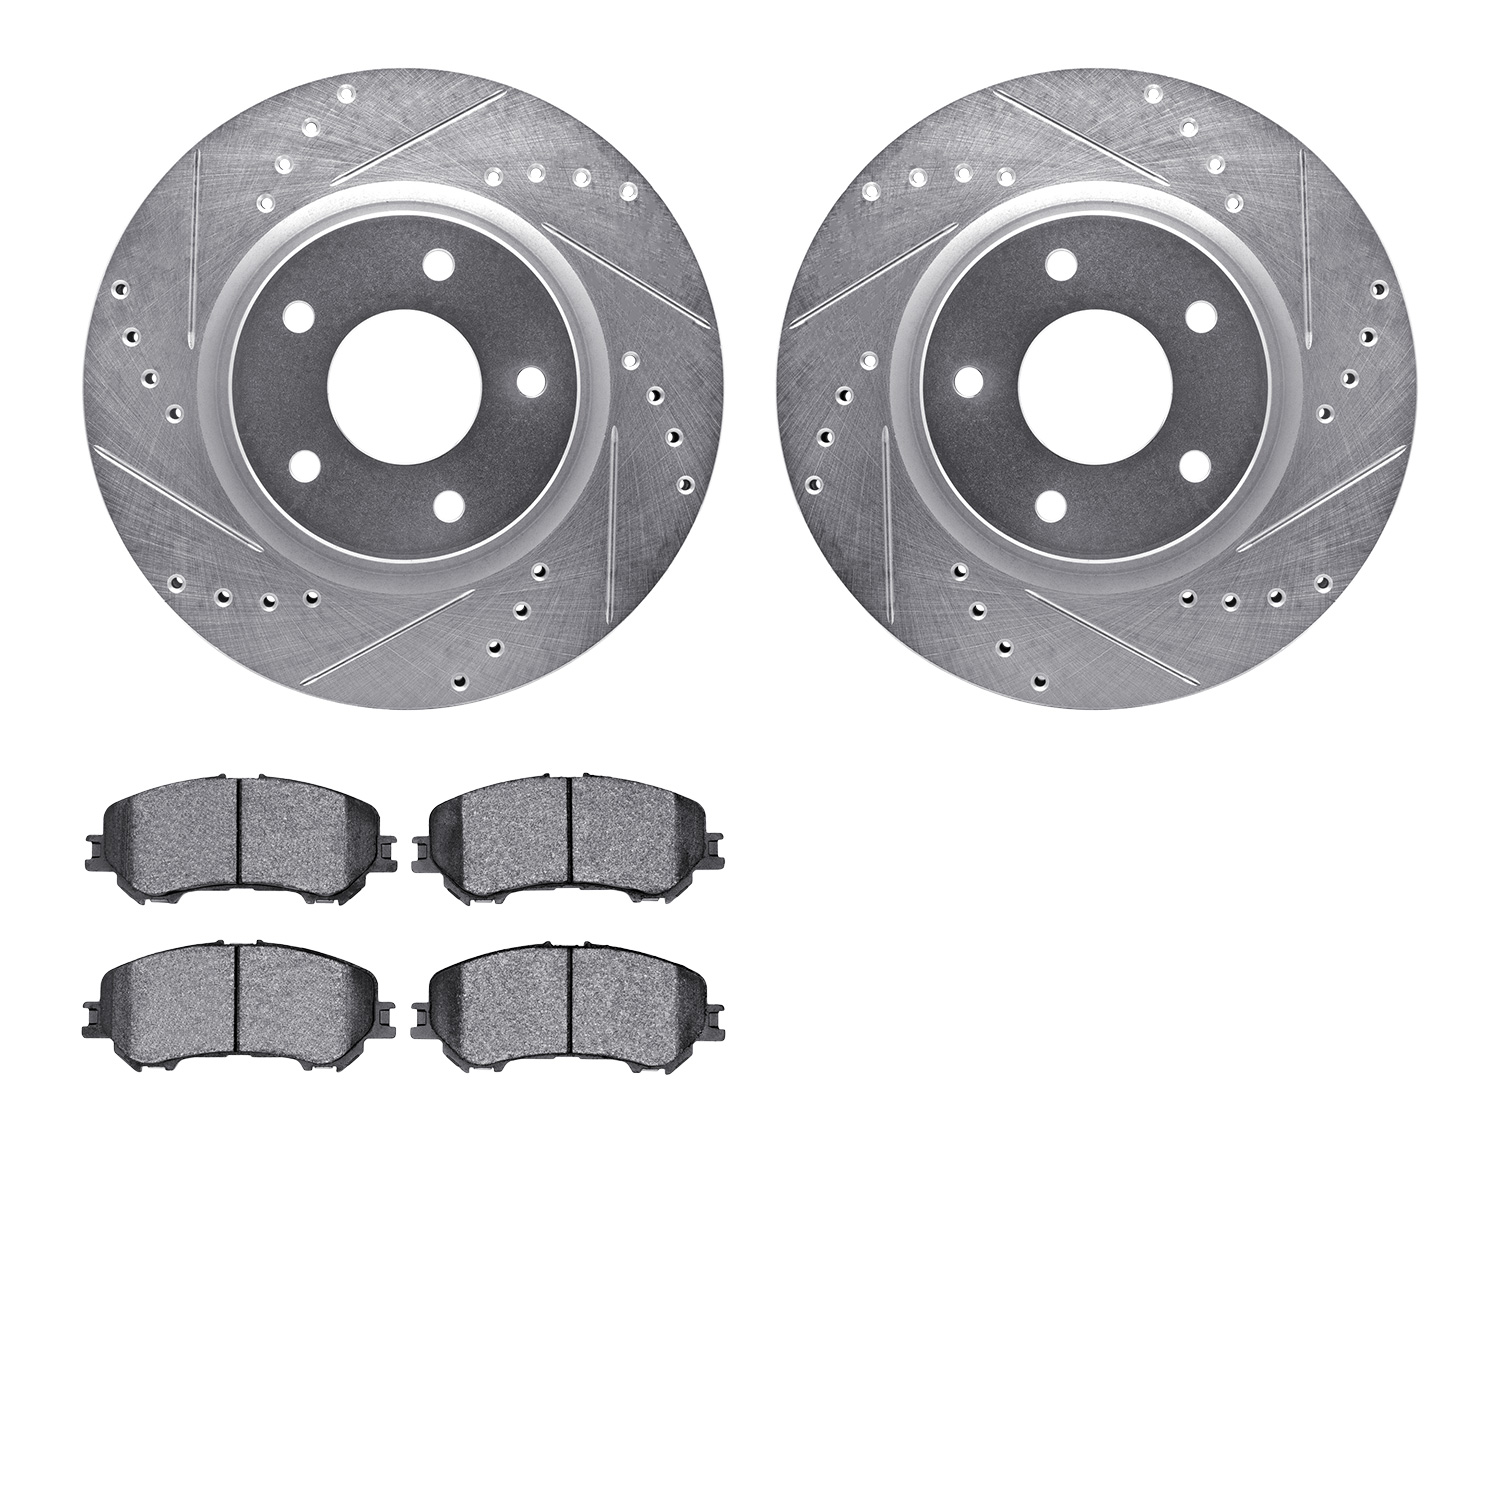 7302-67130 Drilled/Slotted Brake Rotor with 3000-Series Ceramic Brake Pads Kit [Silver], Fits Select Multiple Makes/Models, Posi